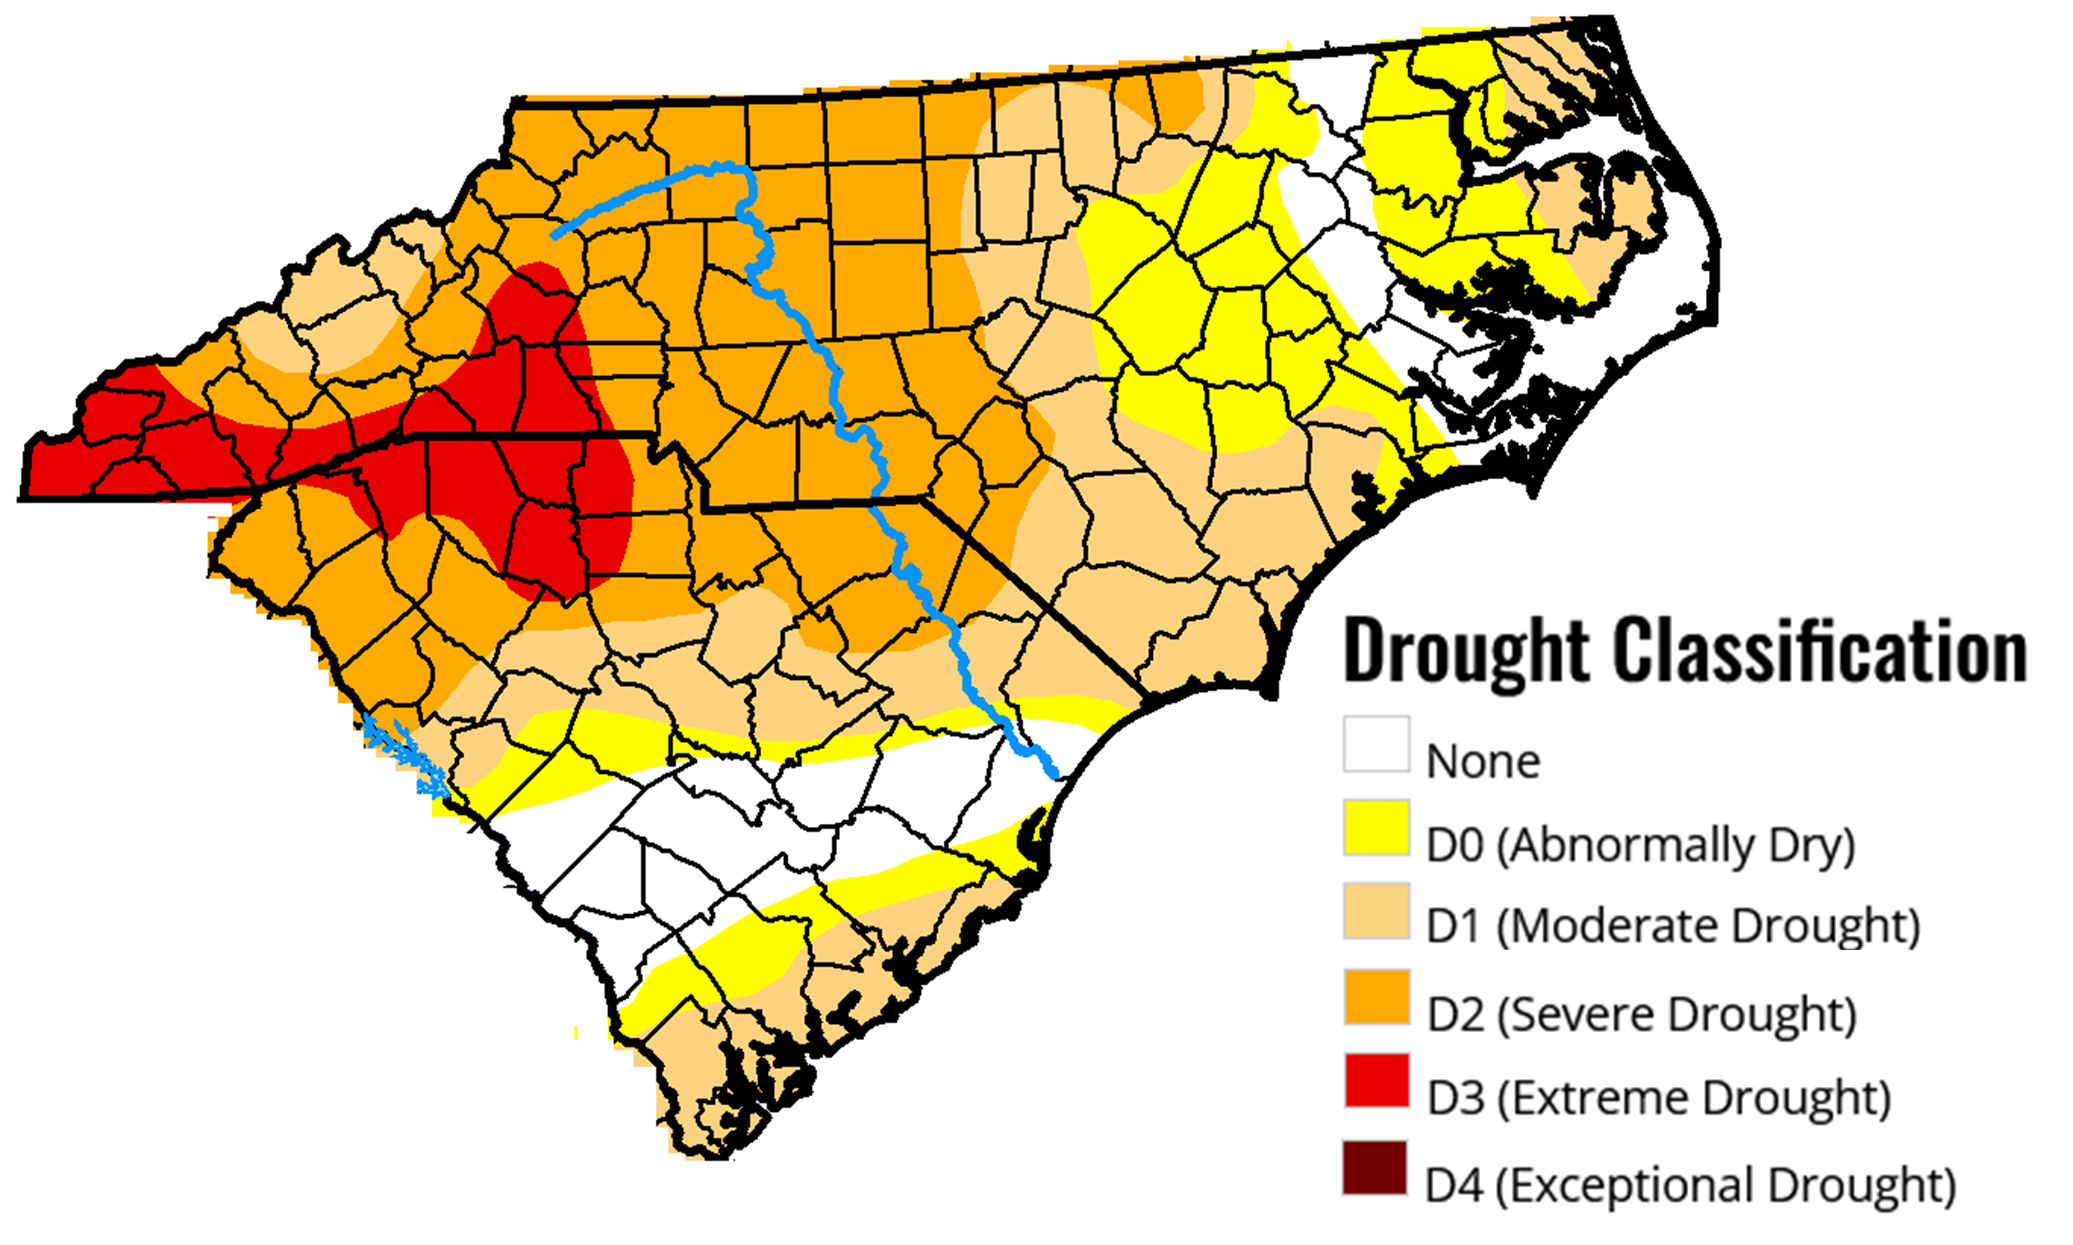 U.S. Drought Monitor during late November showing moderate to severe drought covering a portion of eastern North and South Carolina.  More significant drought was occurring across the western portions of the Carolinas.